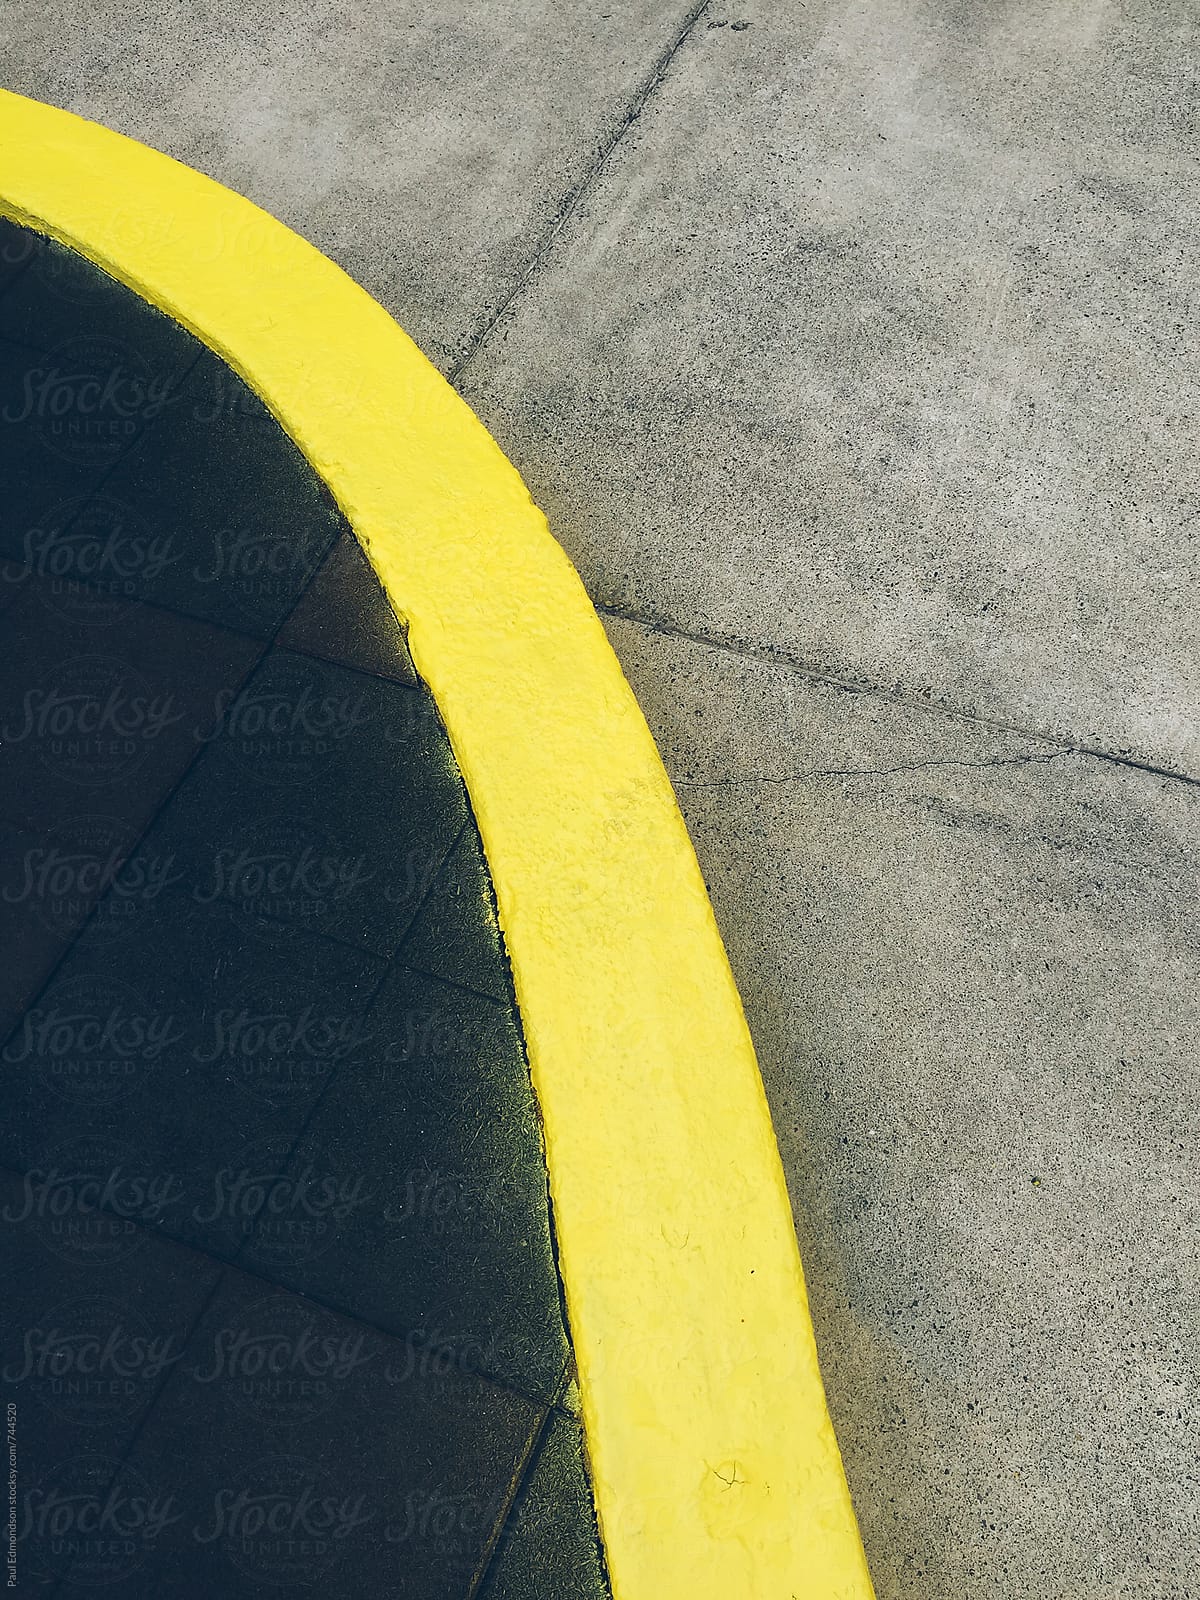 Painted yellow curb and urban sidewalk